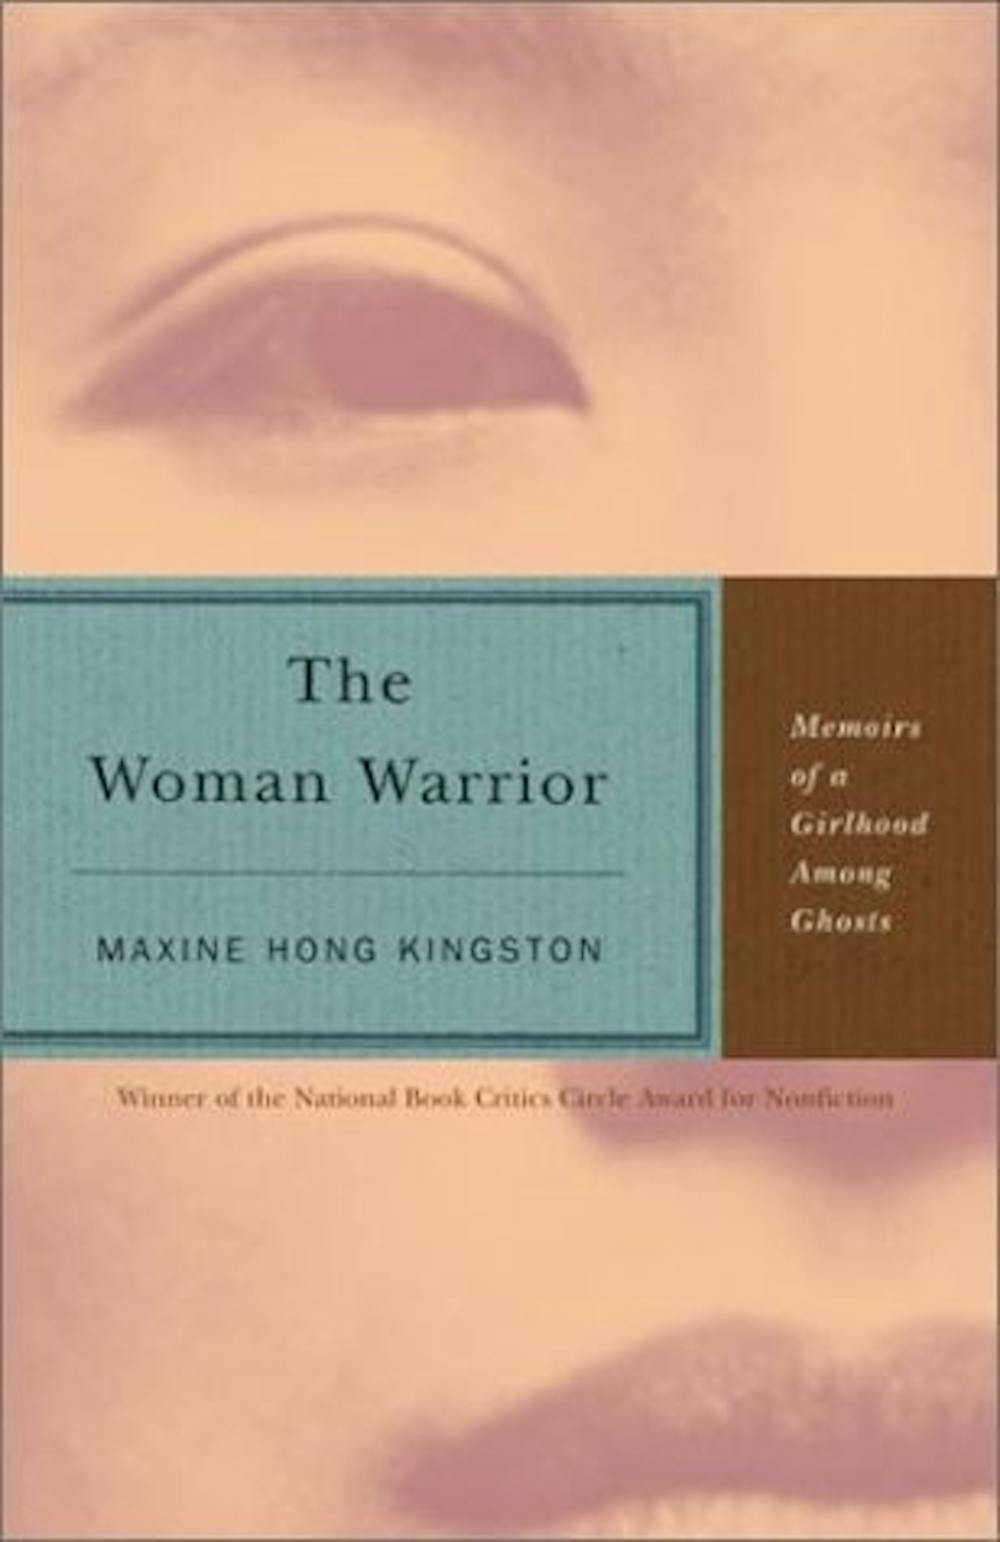 Maxine Hong Kingston's novel examines the struggles&nbsp;of being a woman and&nbsp;a minority.